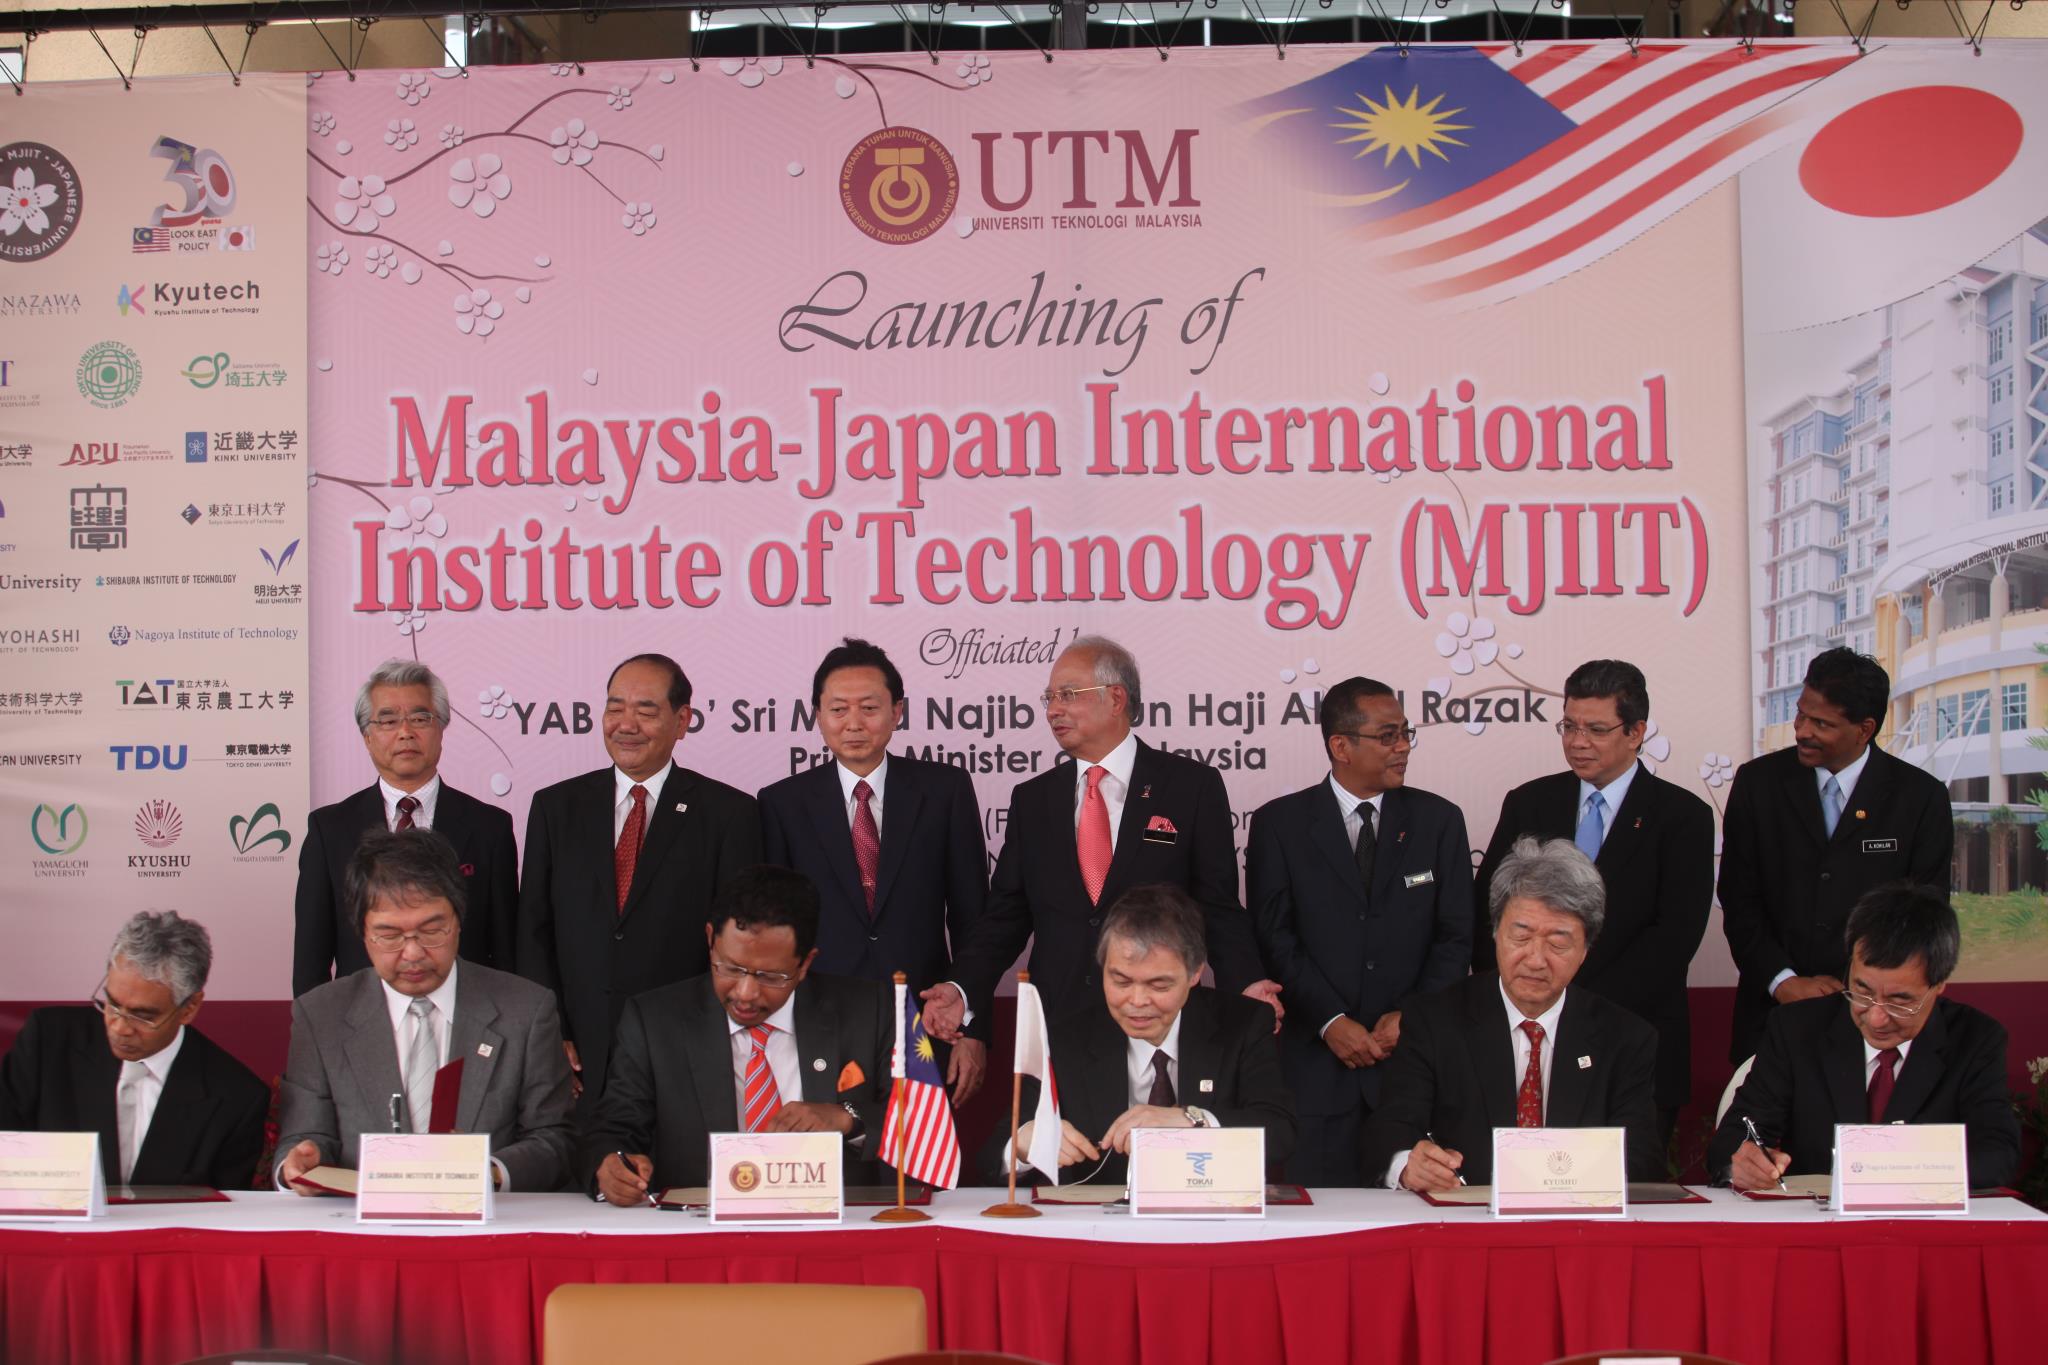 YAB Prime Minister of Malaysia launched Malaysia-Japan International Institute of Technology (MJIIT)